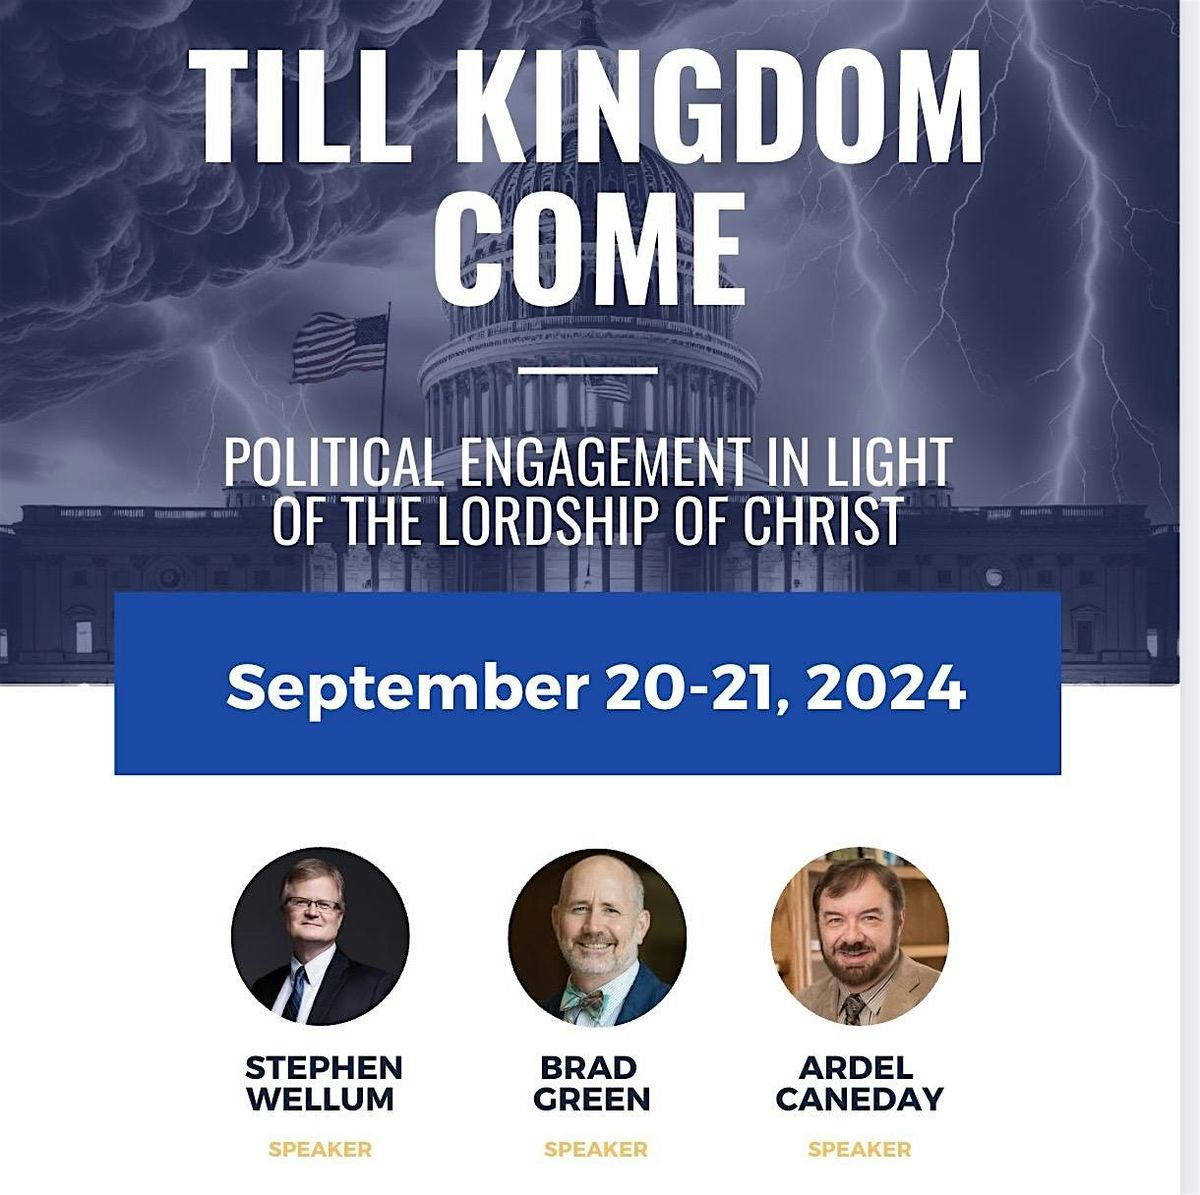 Till Kingdom Come: Political Engagement in Light of the Lordship of Christ